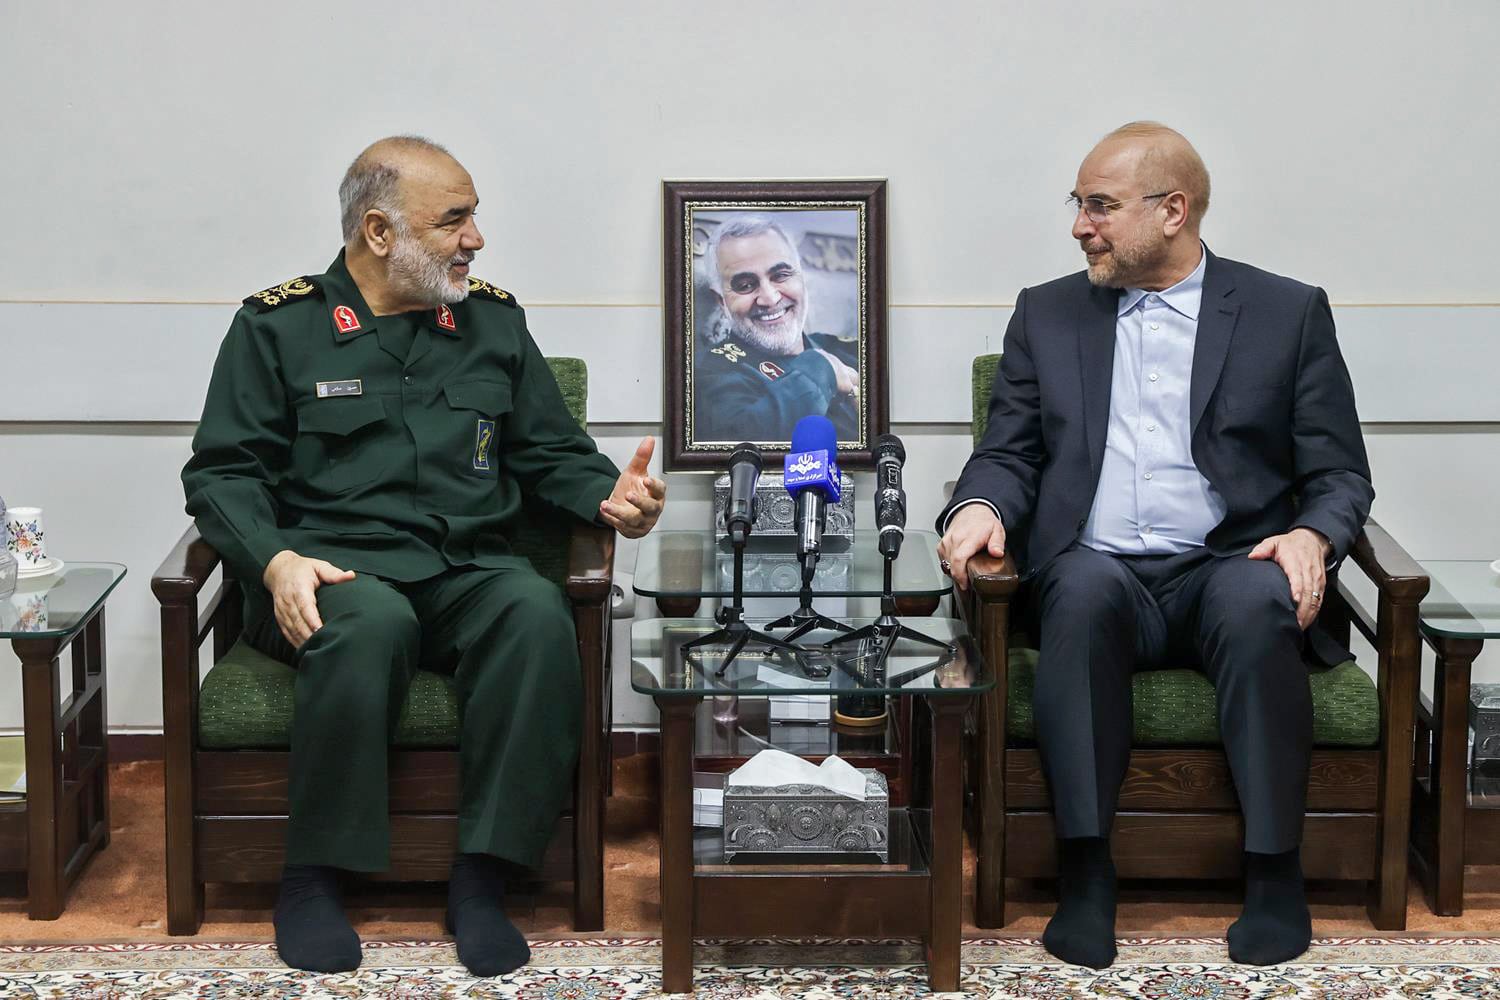 TEHRAN: Picture provided by the Islamic Consultative Assembly News Agency (ICANA) shows Iranian parliament speaker Mohammad Bagher Ghalibaf (R) meeting with the Islamic Revolutionary Guard Corps (IRGC) chief Hossein Salami, in the capital Tehran. The IRGC warned the European Union against making a “mistake” by listing it as a terror group, after the bloc’s parliament called for the measure. — AFP